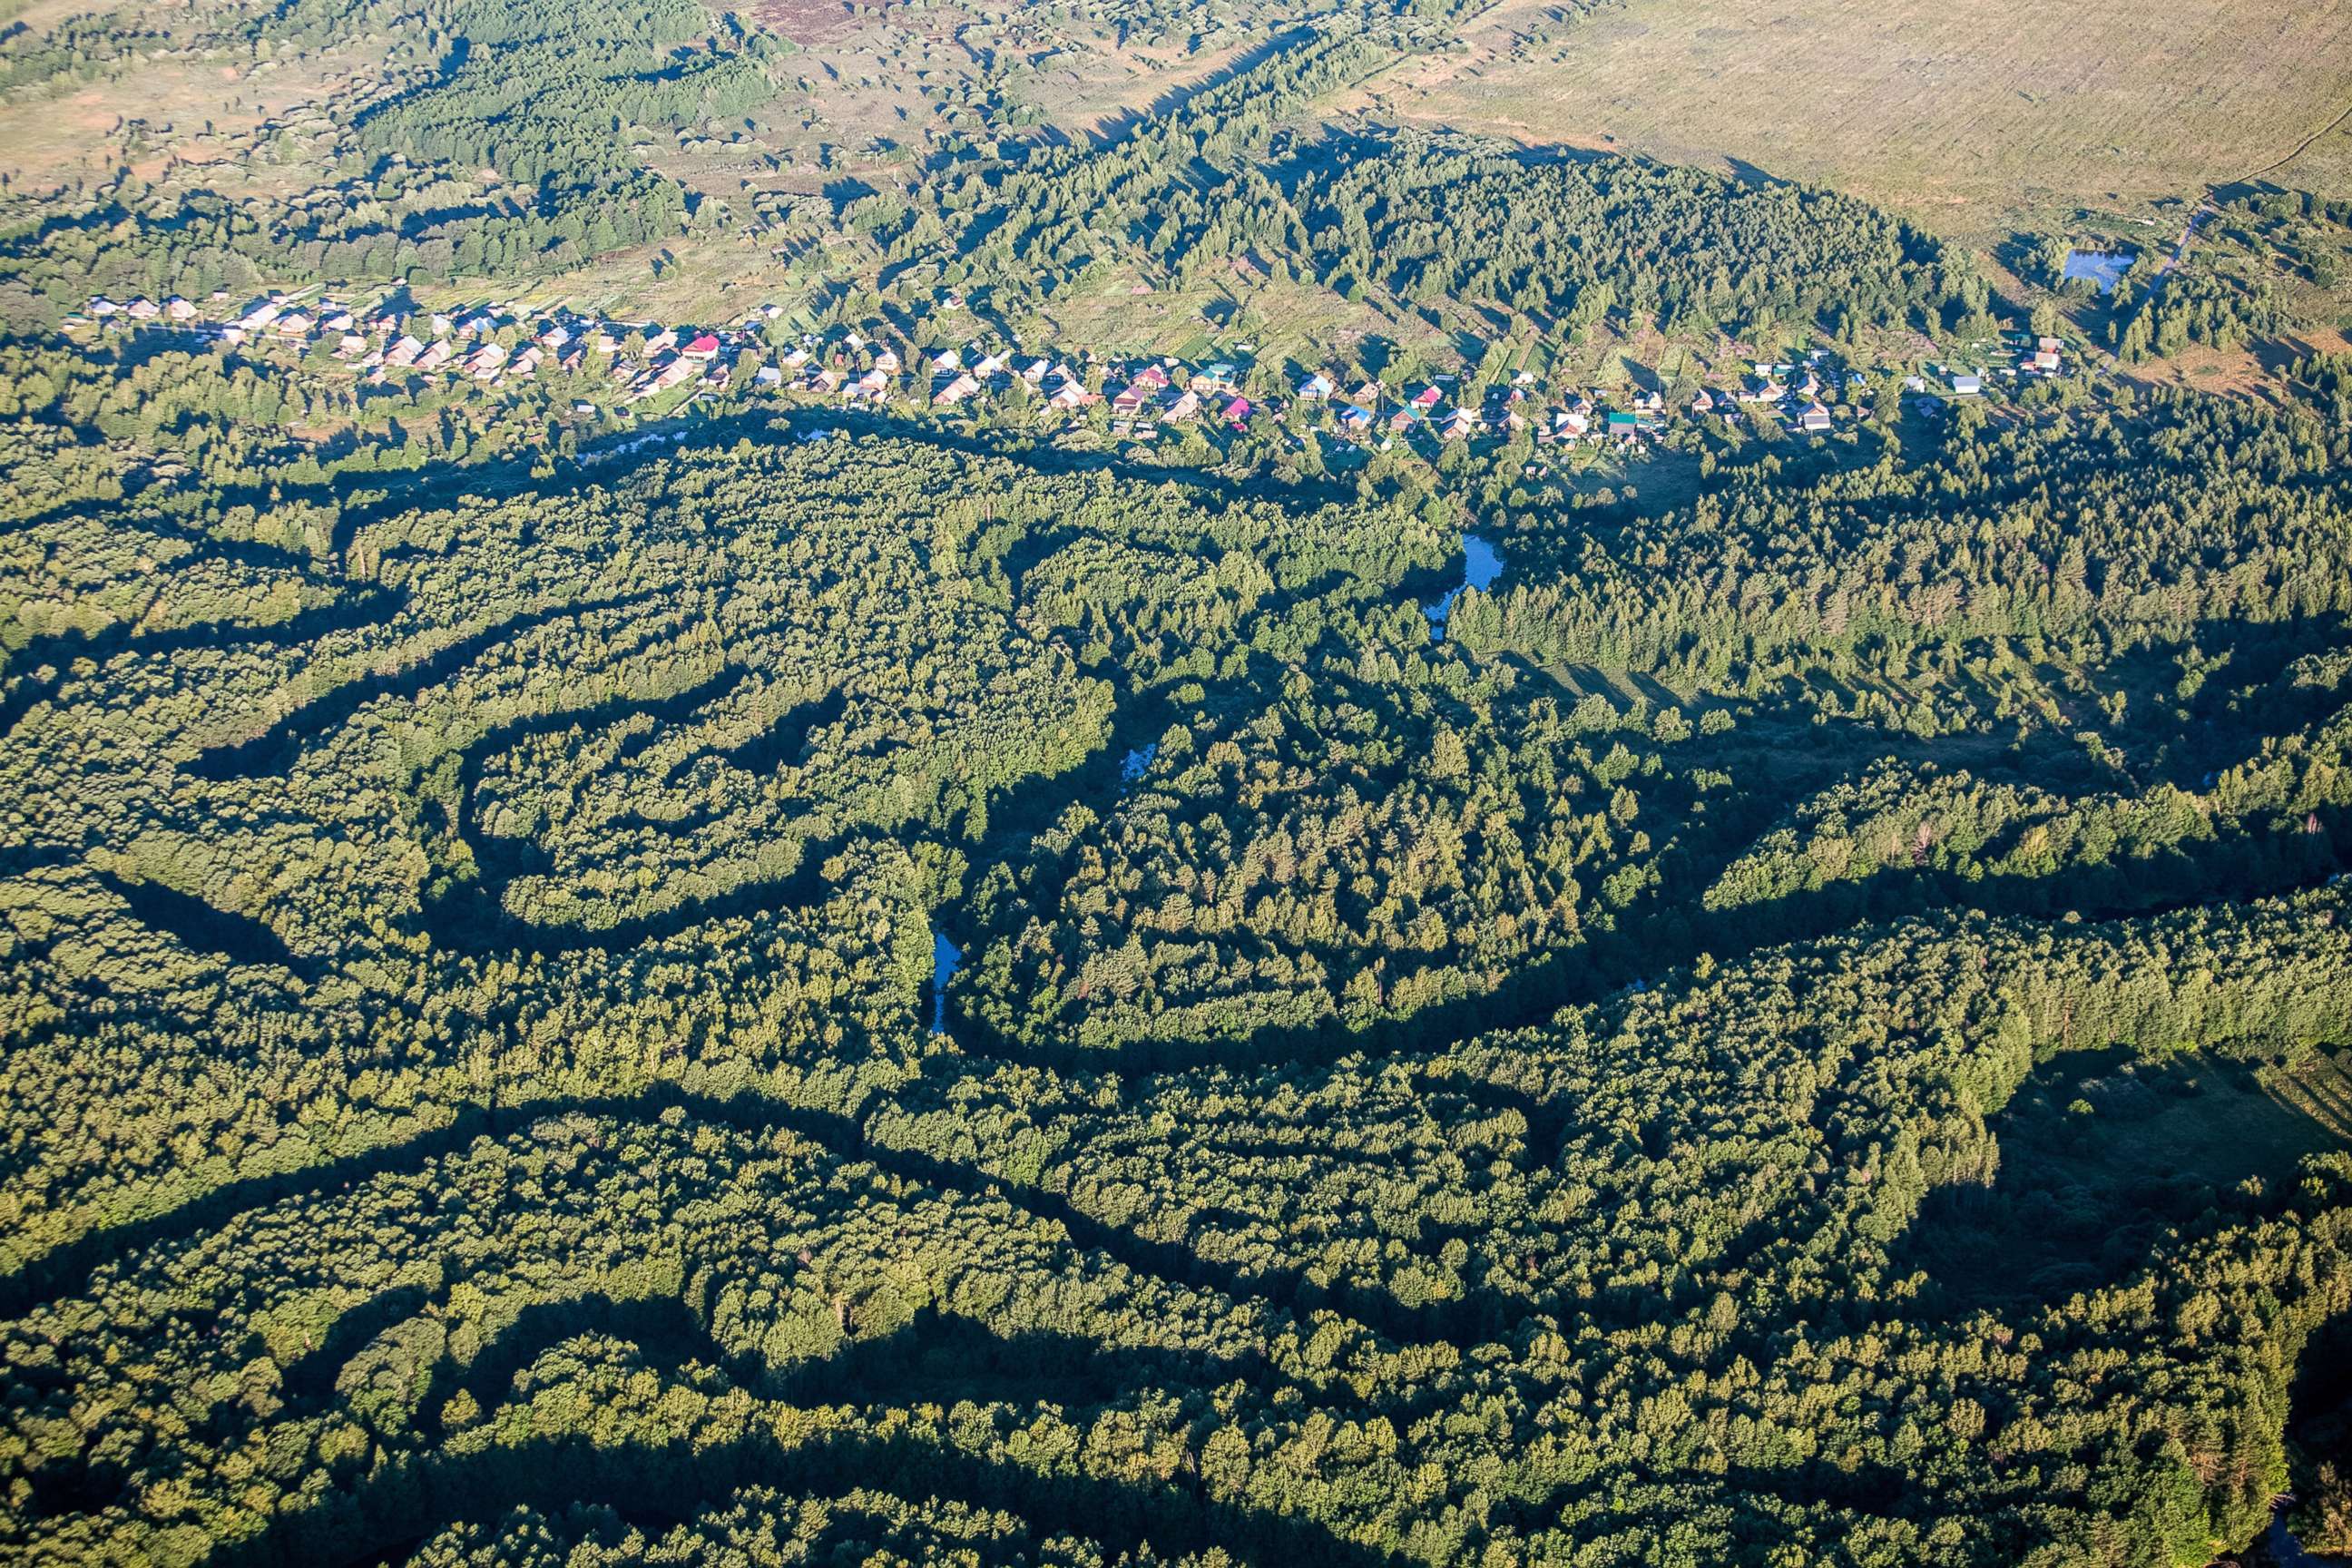 PHOTO: In this July 31, 2018, file photo, an aerial view of houses in a forest near the village of Merinovo is shown in the Nizhny Novgorod region of Russia.